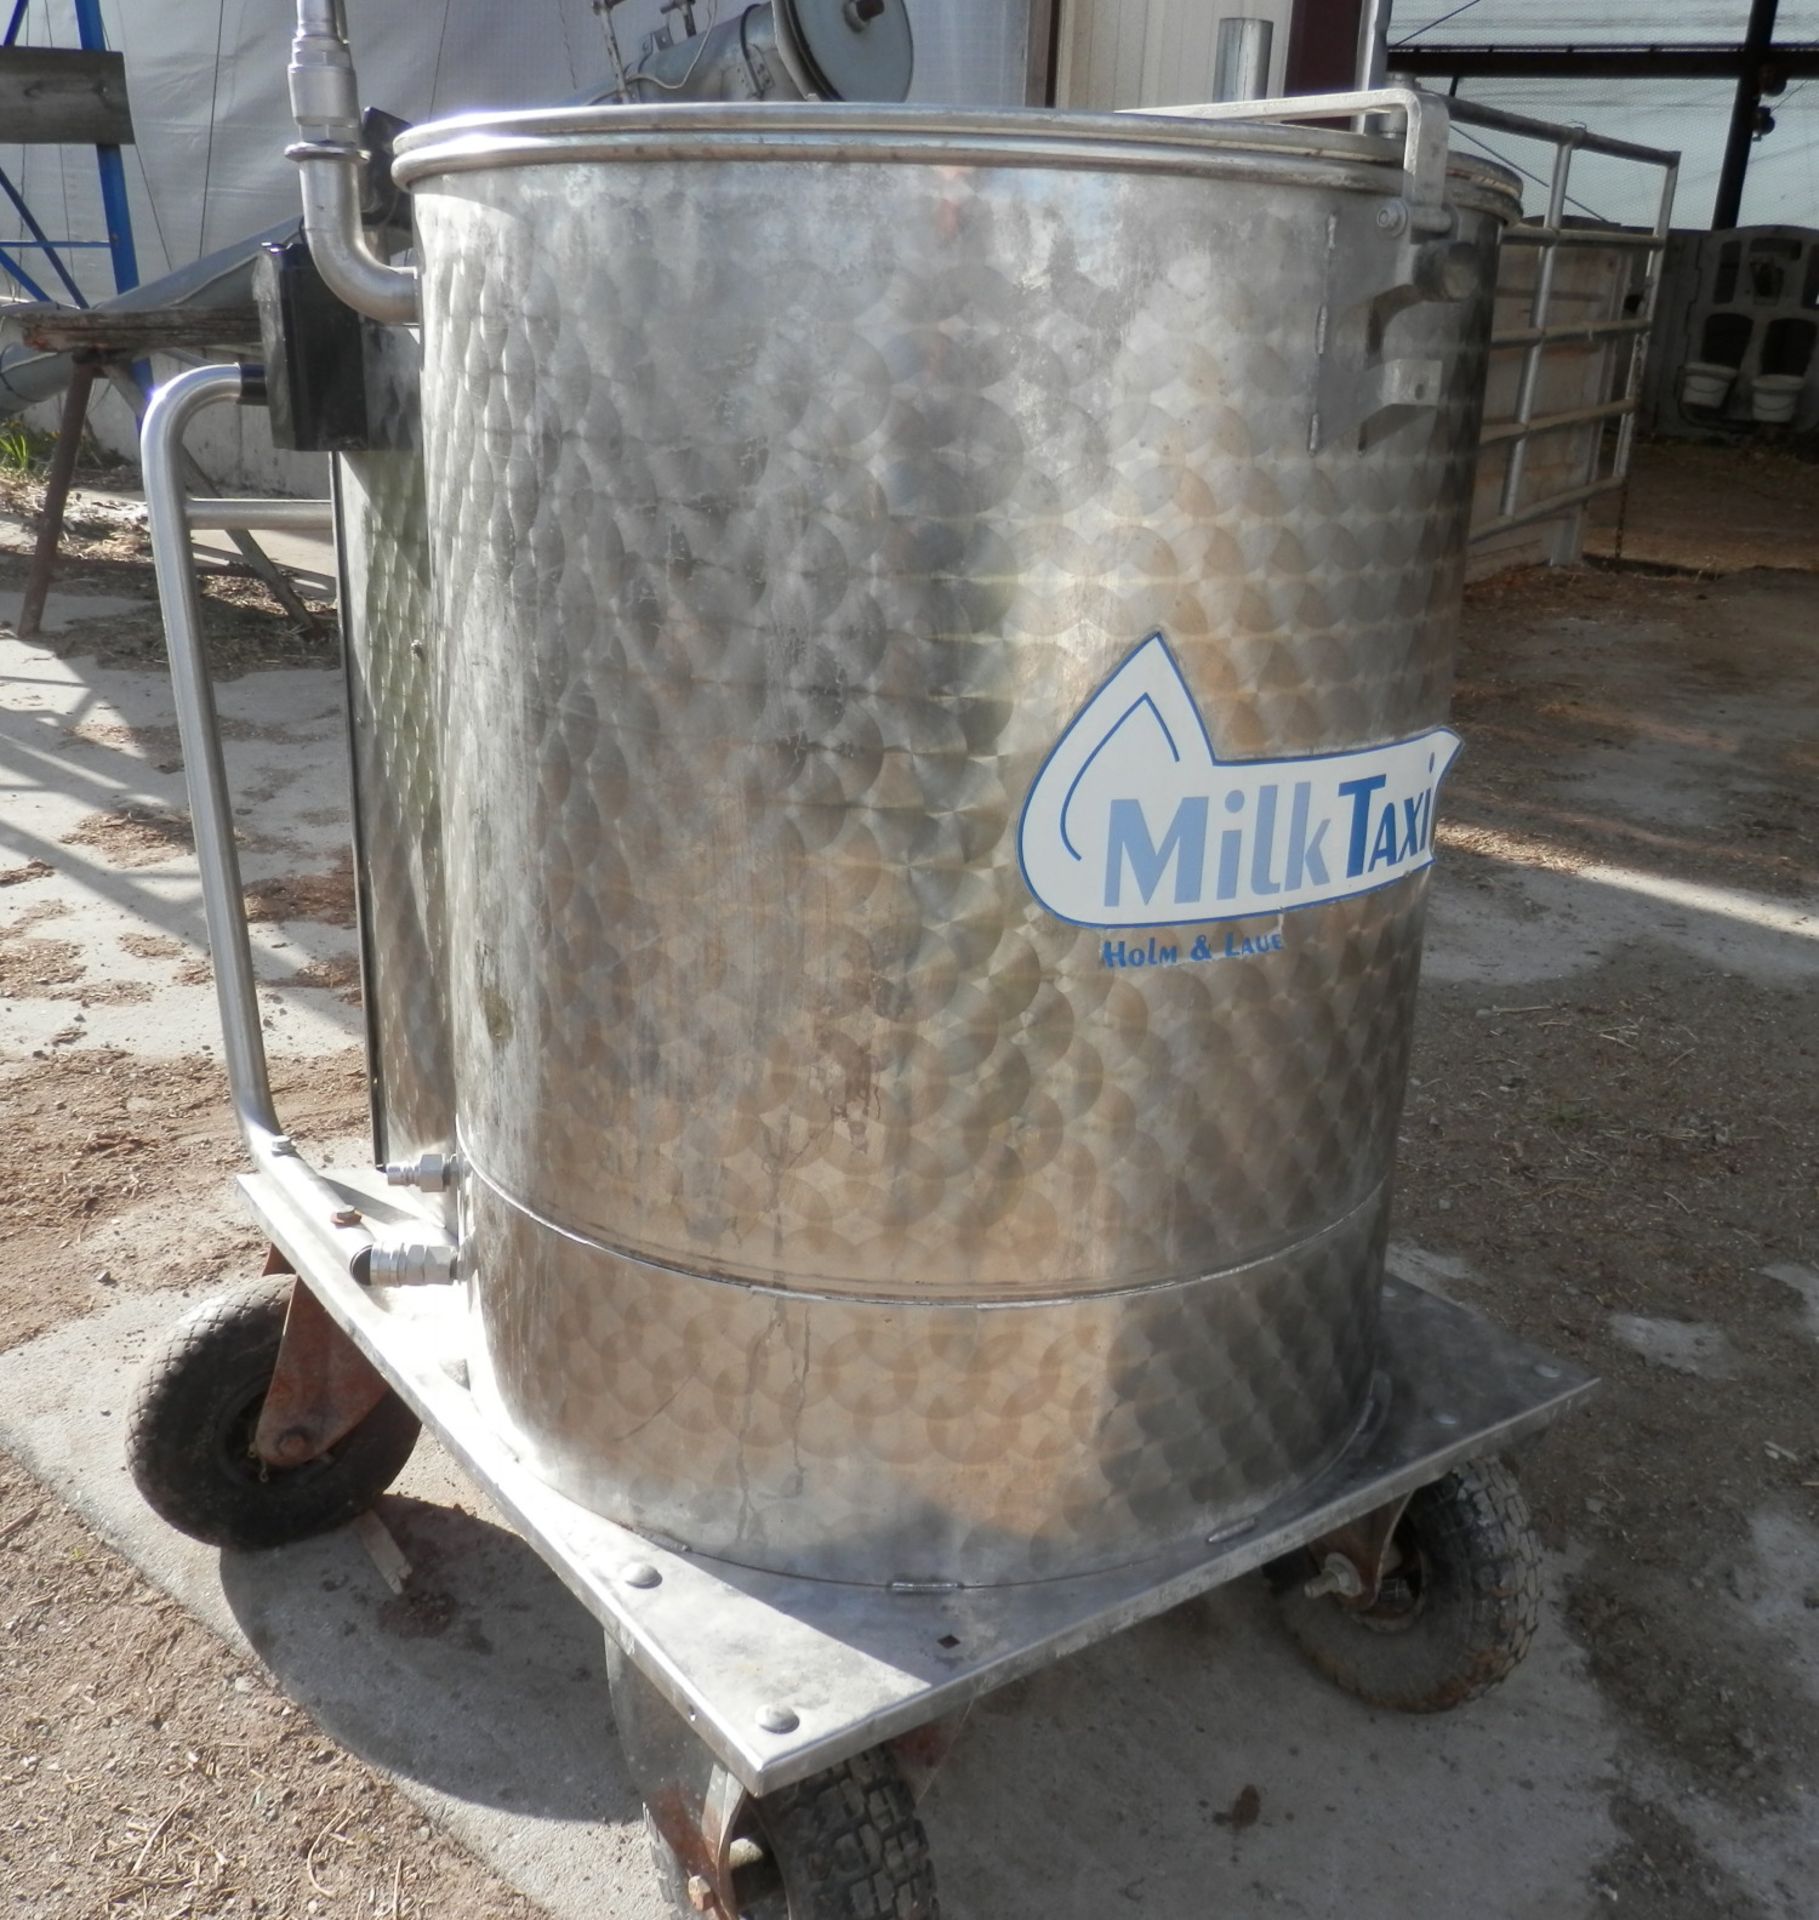 HOME & LAUE MILCH TAXI 60 GAL. MILK DELIVERY SYSTEM